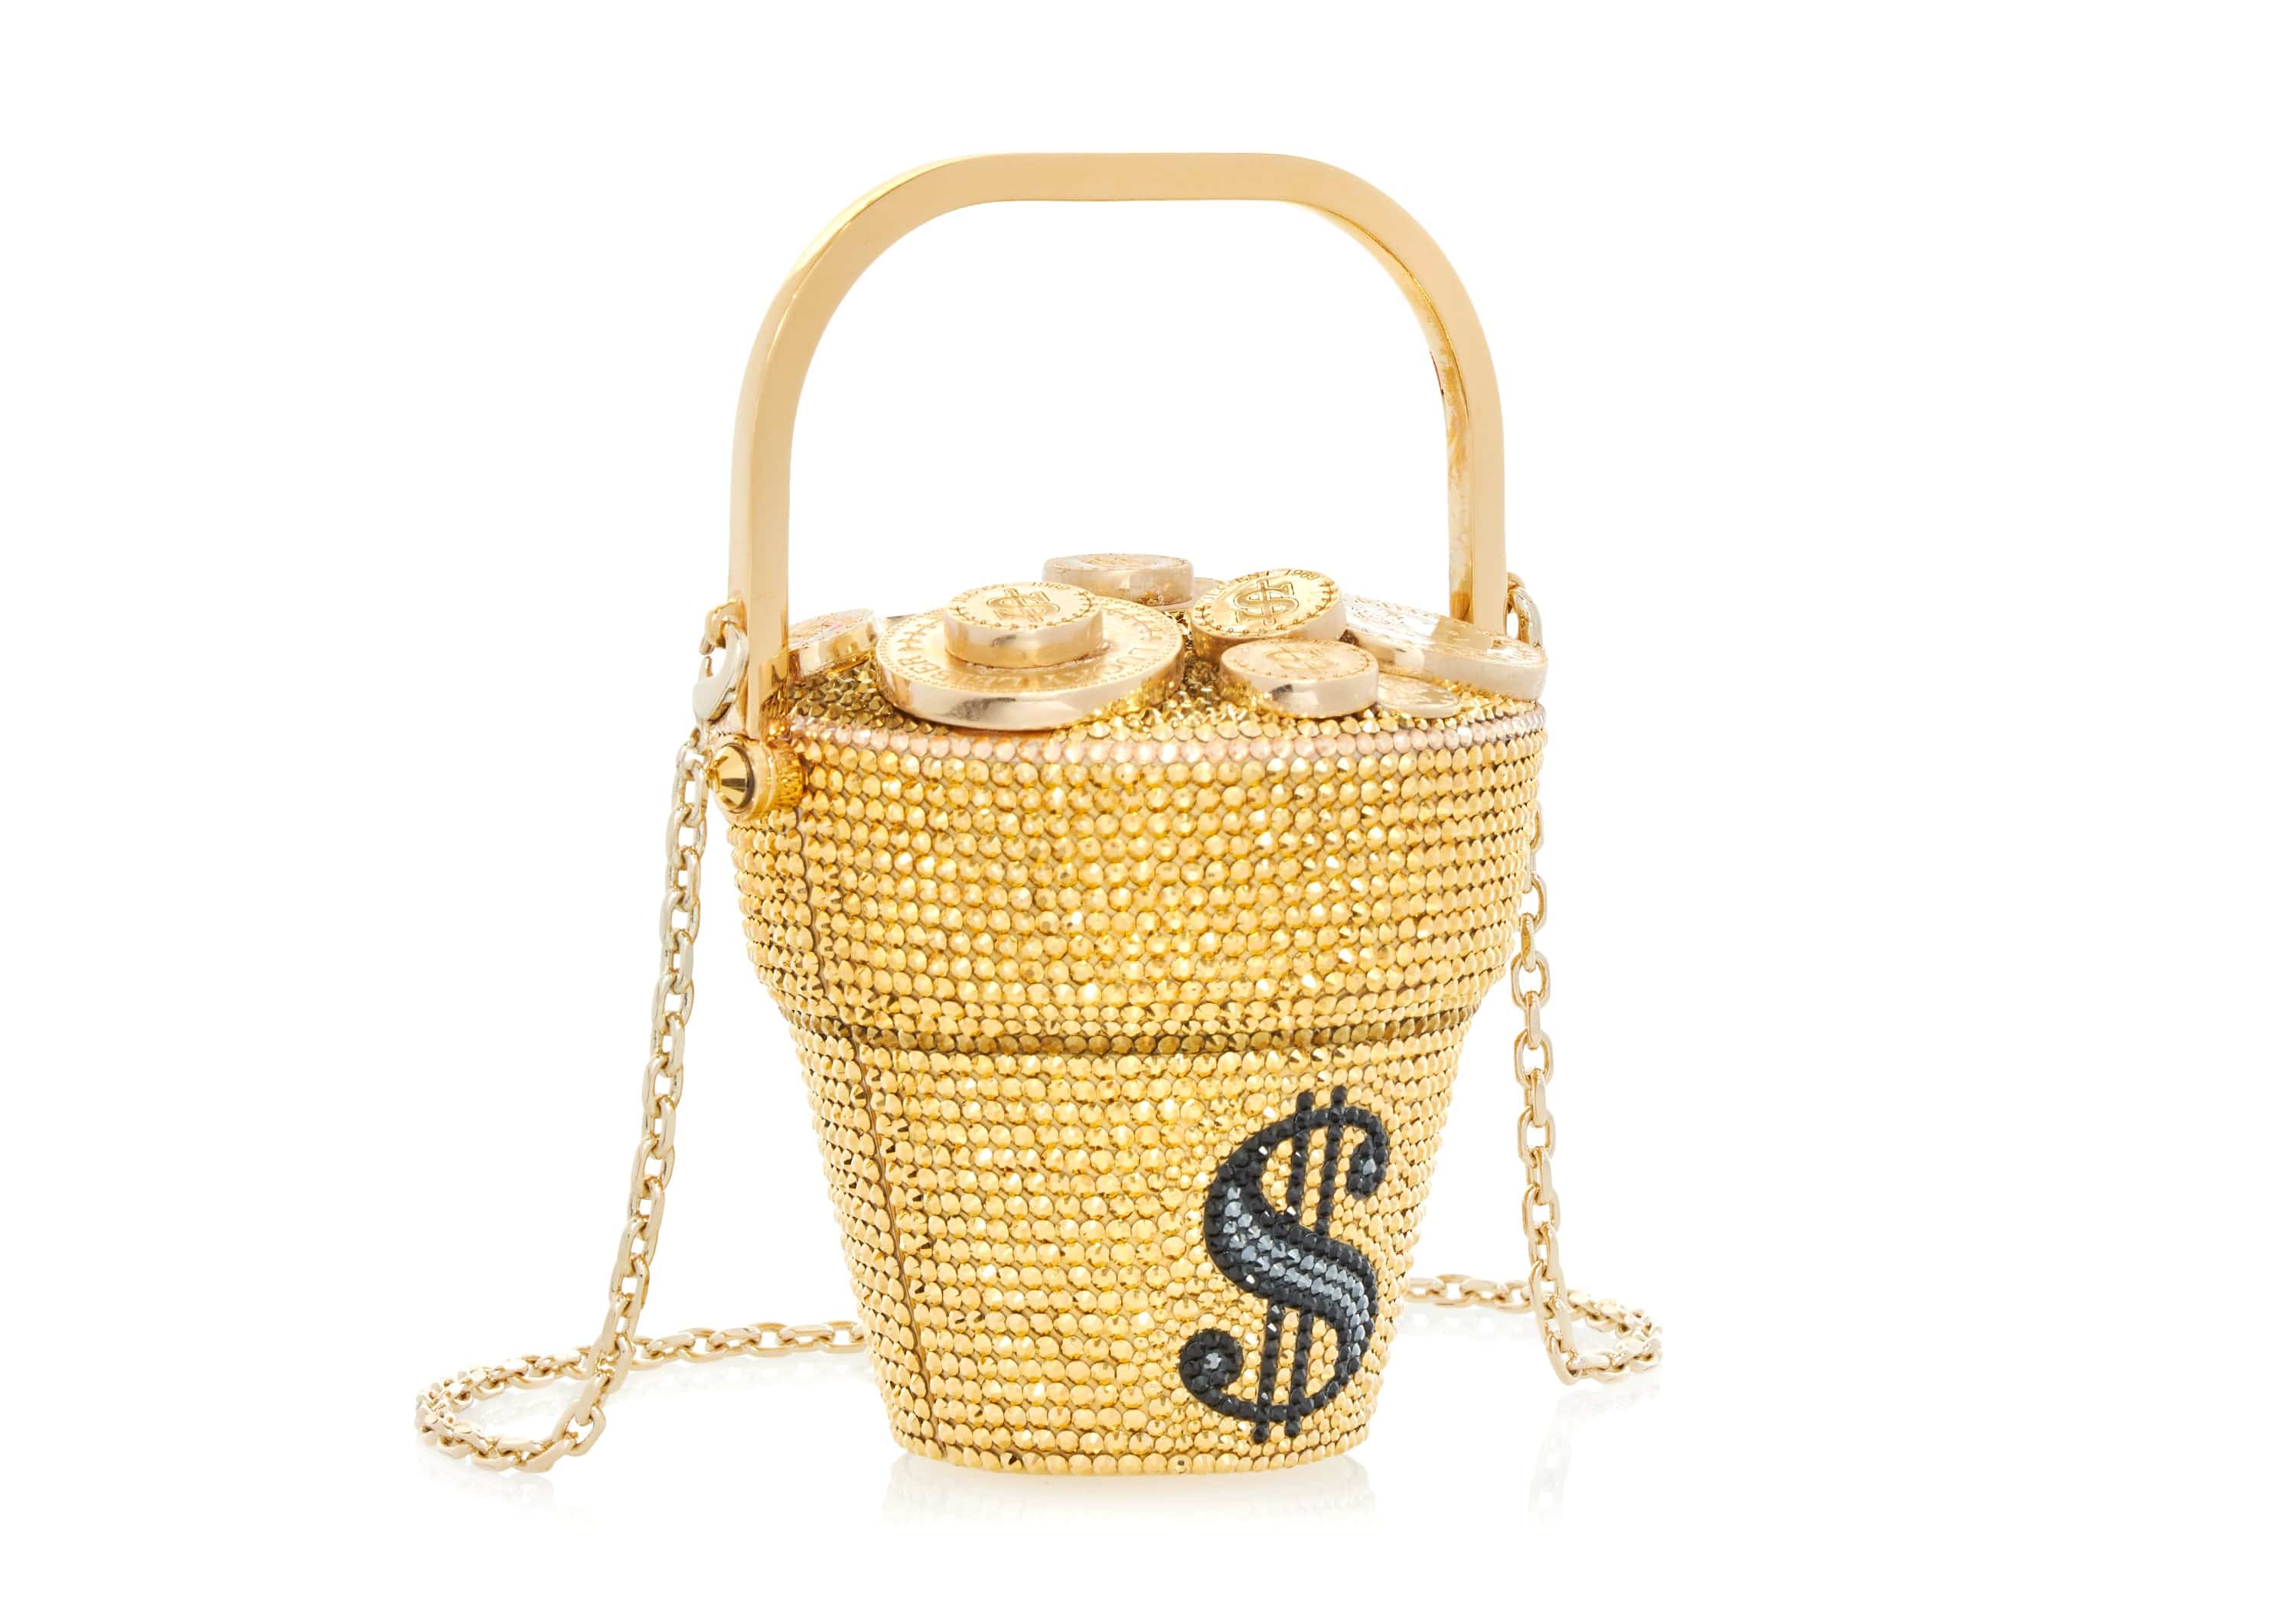 Bag Of Coins Coin Purse Money - Free photo on Pixabay - Pixabay